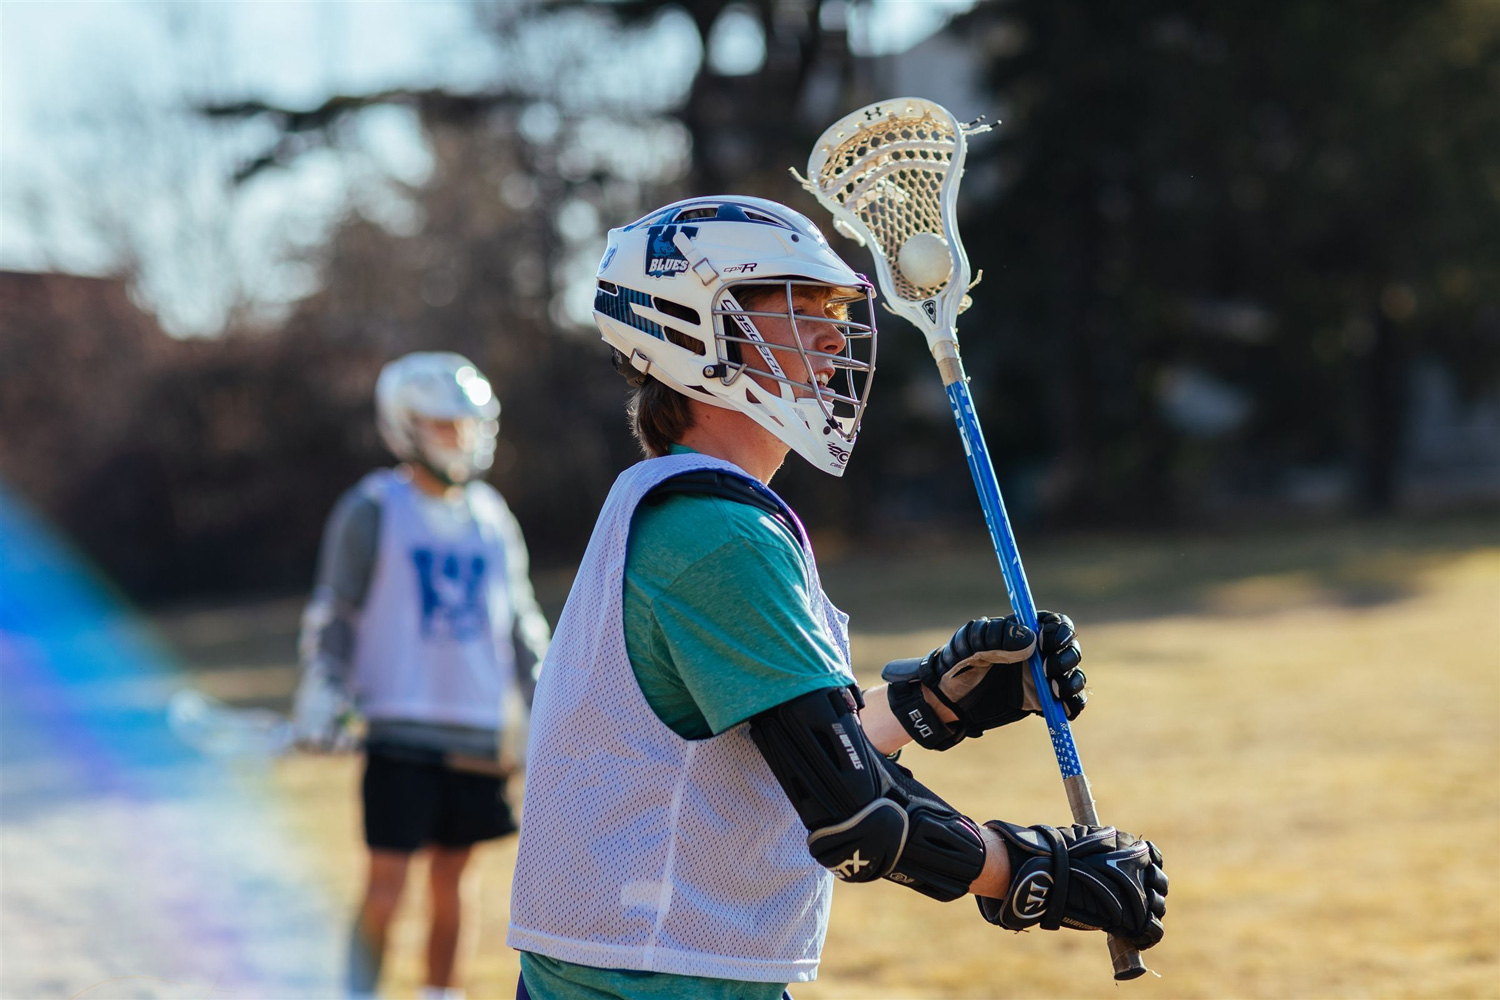 student lacrosse player holding stick